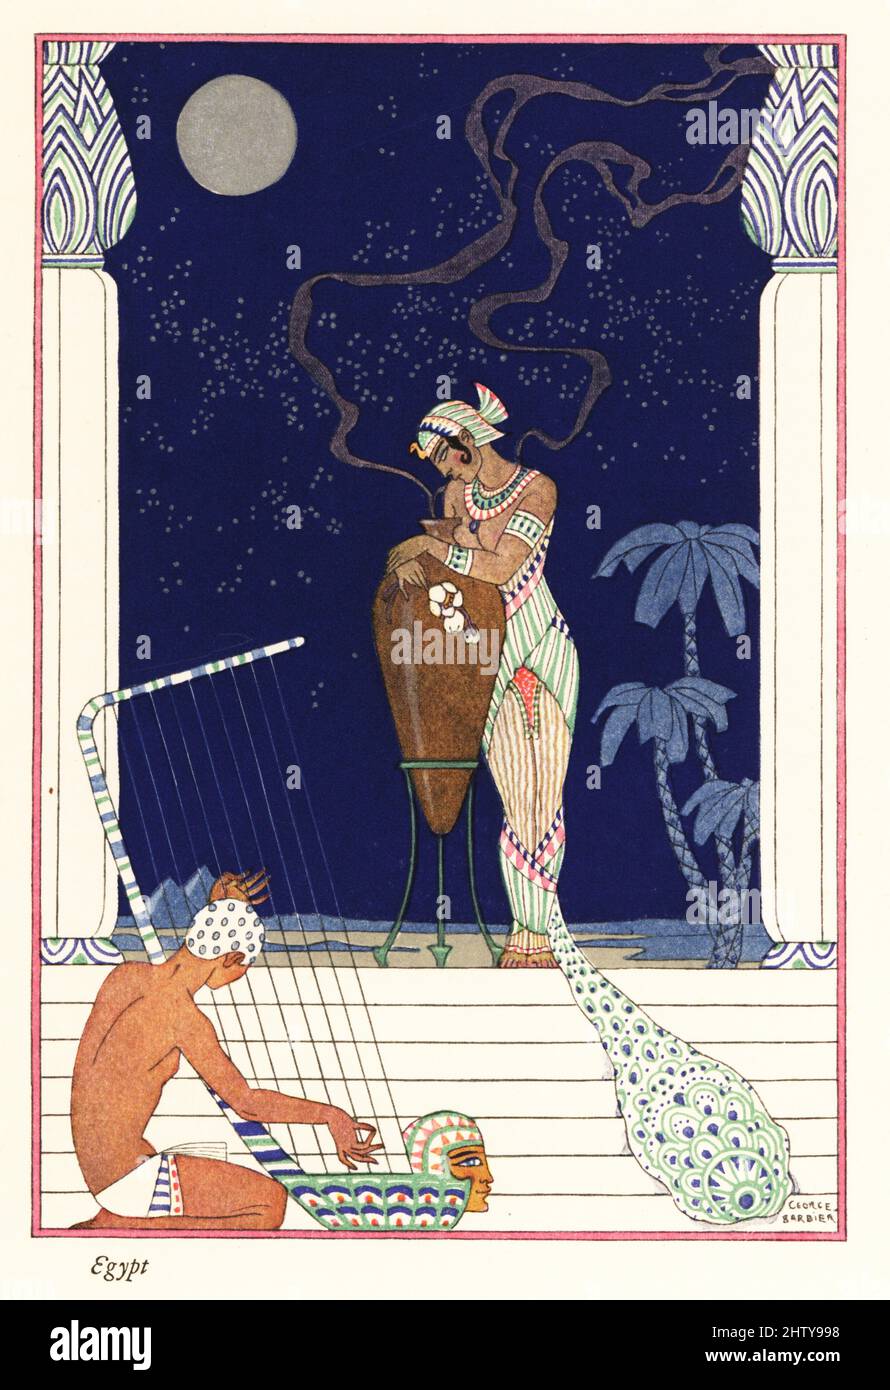 A queen stands smelling fragrance burnt in a large amphora, ancient Egypt. A musician plays the harp in the moonlight. Smithsonian-process colour print after Art Deco master George Barbier from Richard le Gallienne’s Romance of Perfume, Hudnut, New York, 1928. Stock Photo